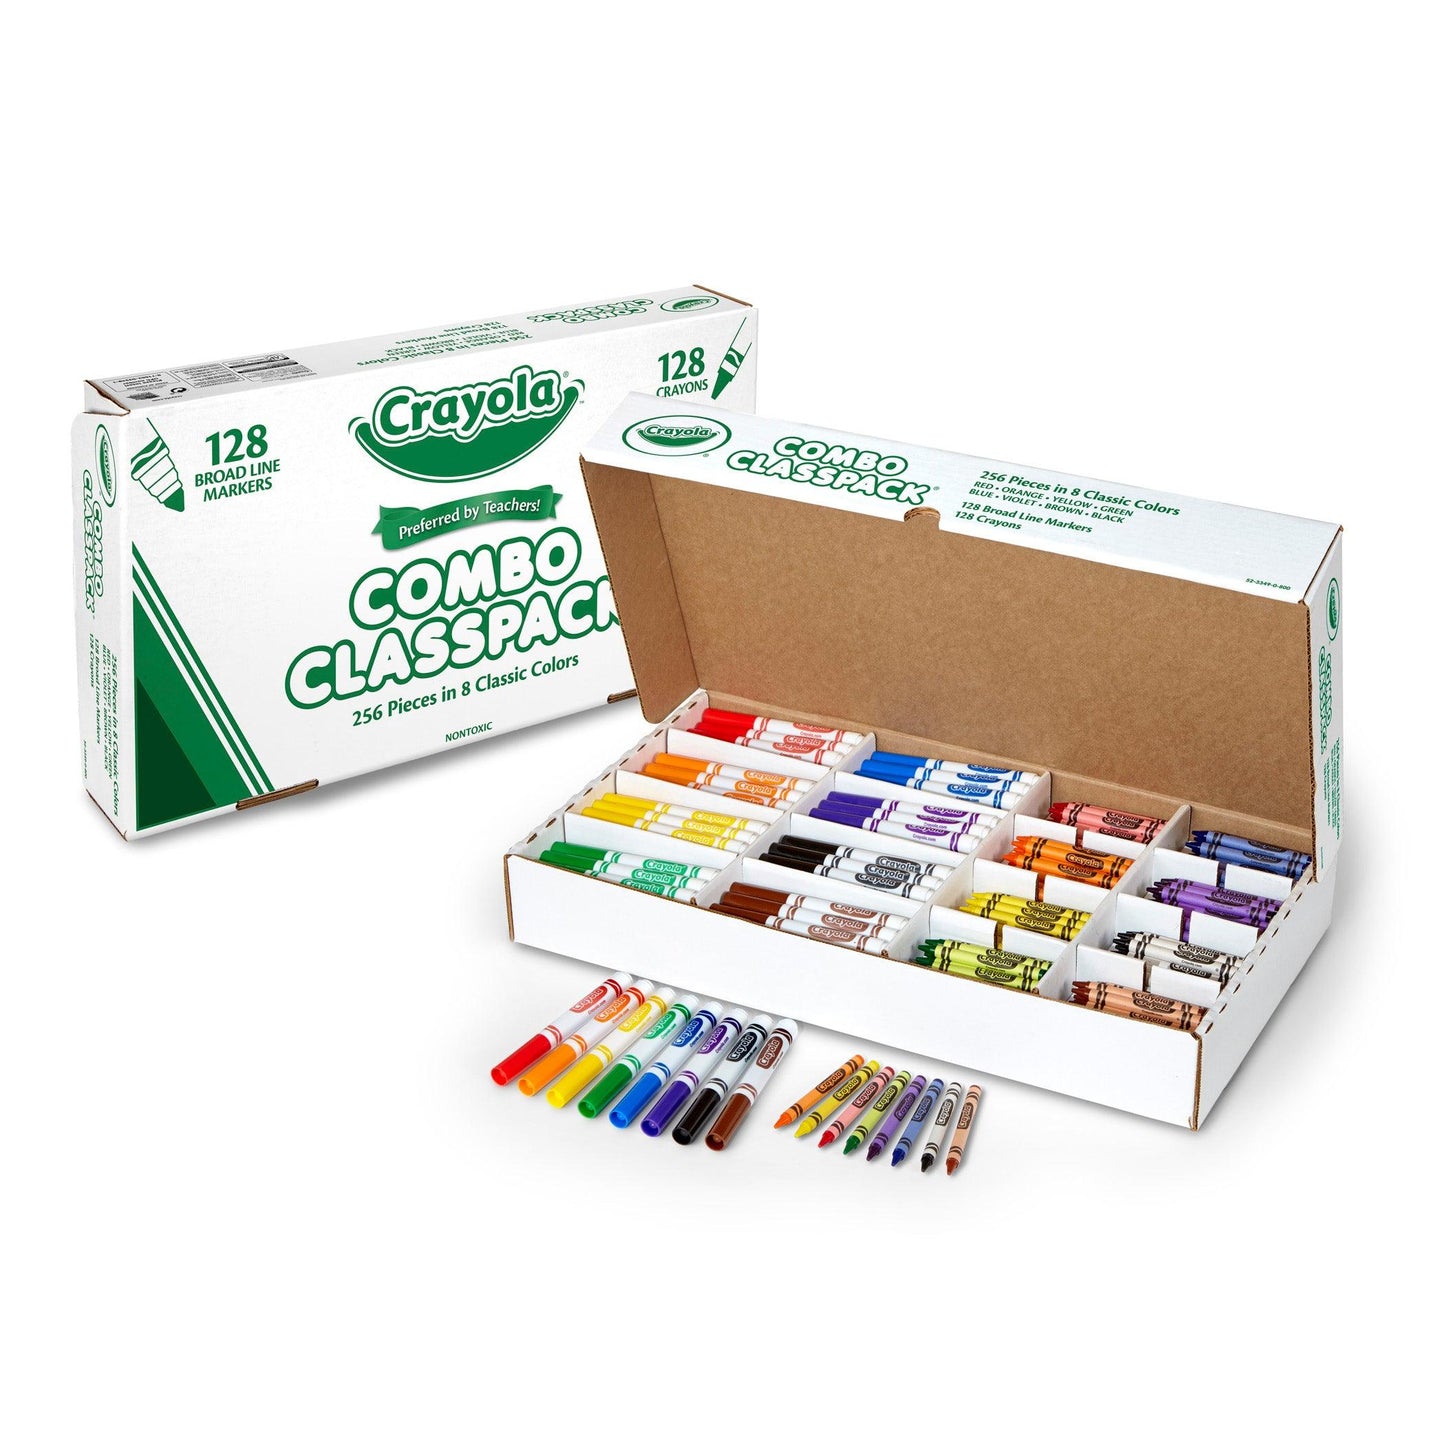 Crayon/Marker Combo Classpack®, 8 Colors, Pack of 256 - Loomini